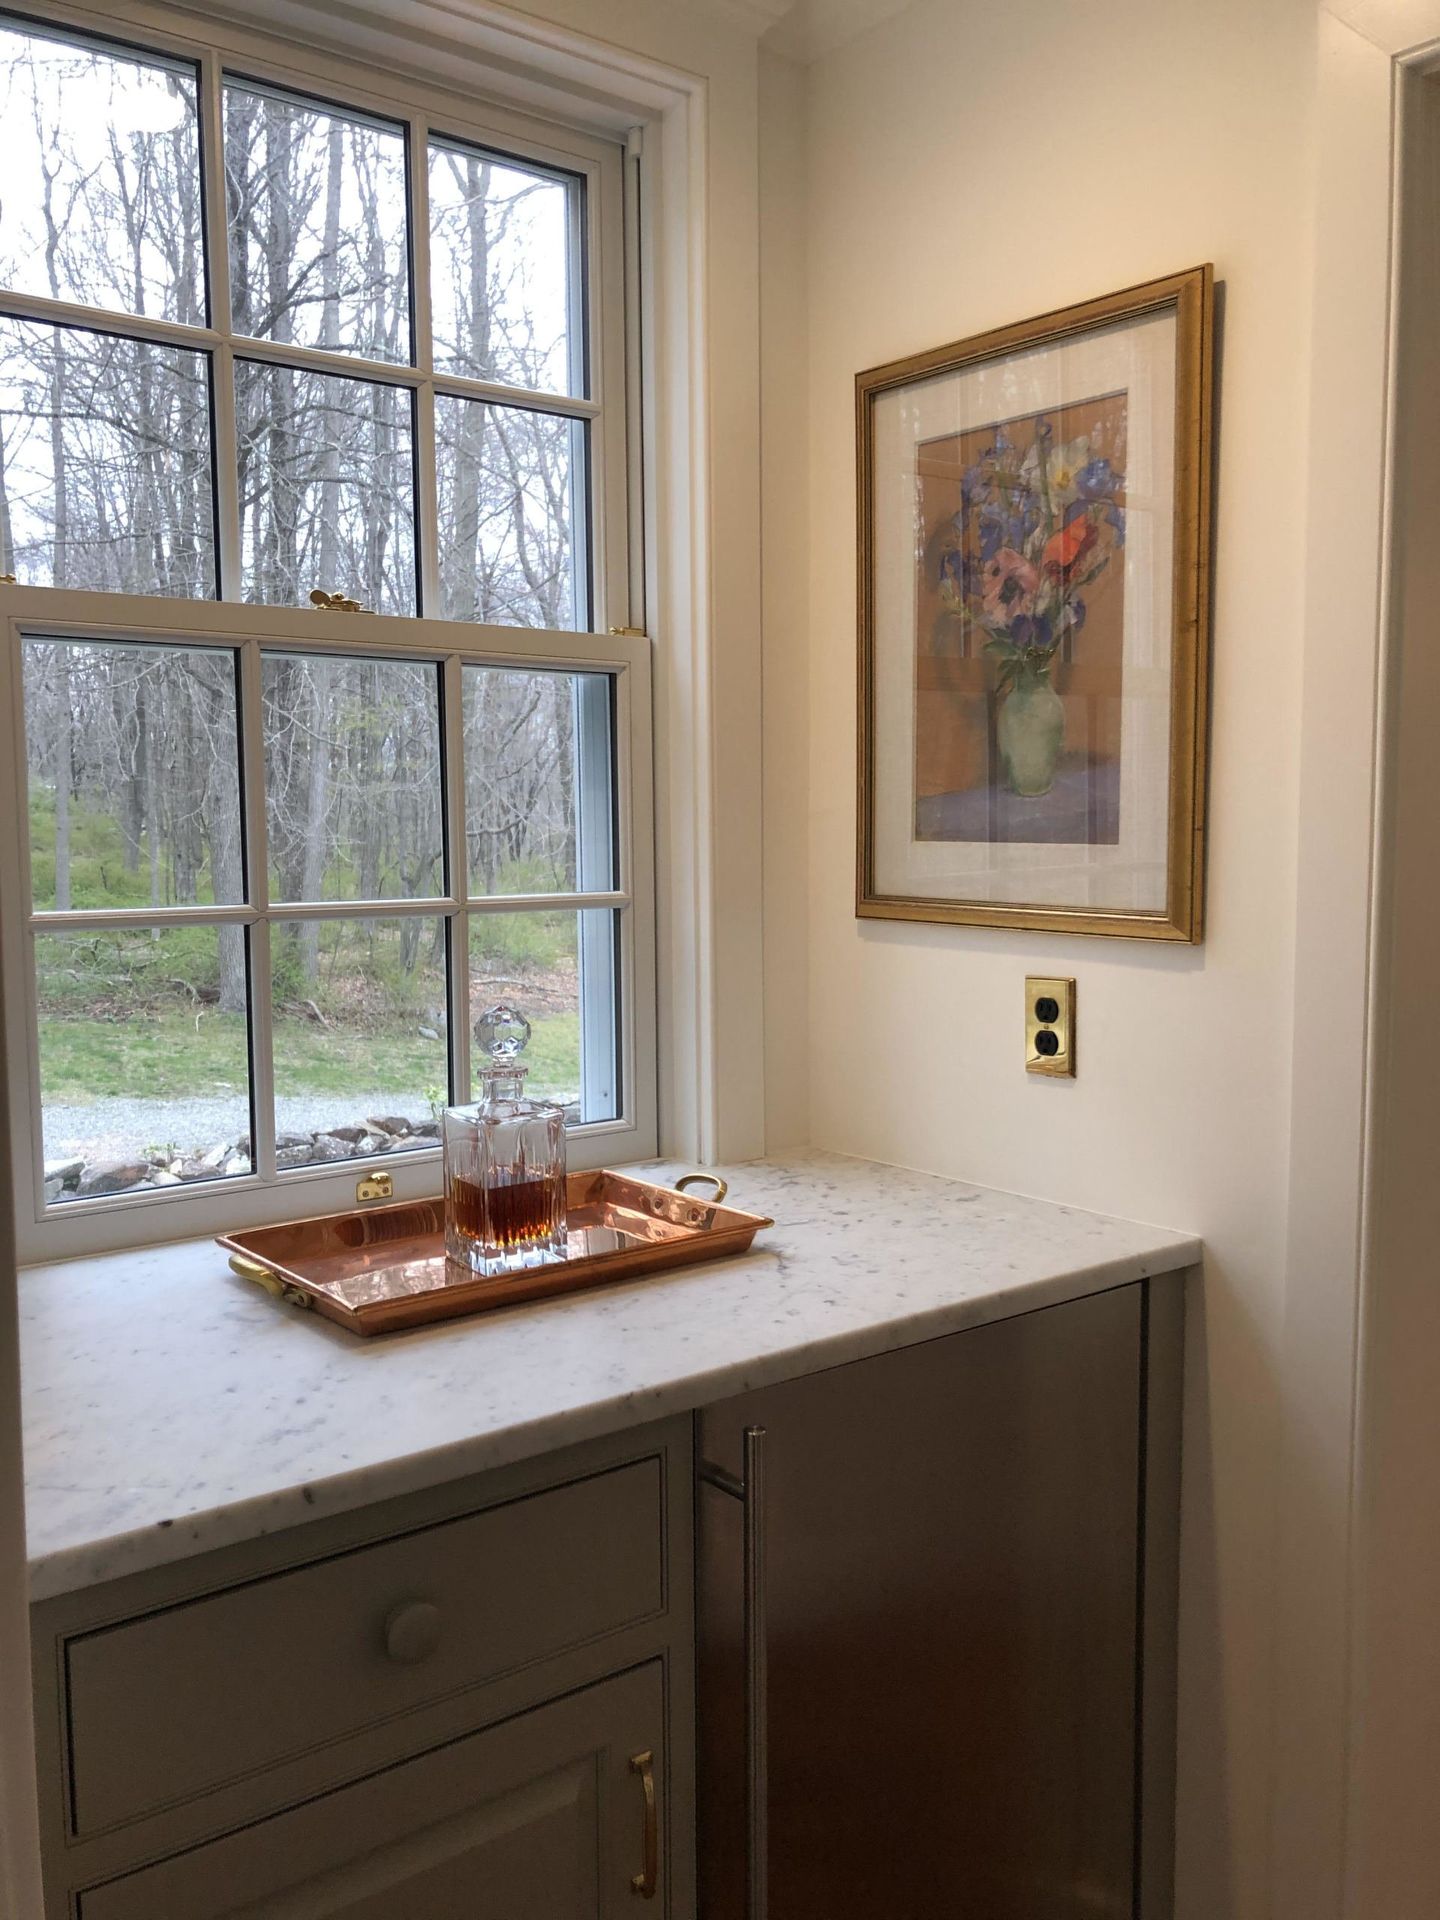 White Counter Tops — Hudson Valley Cabinet And Woodworking Inc — Fishkill, NY